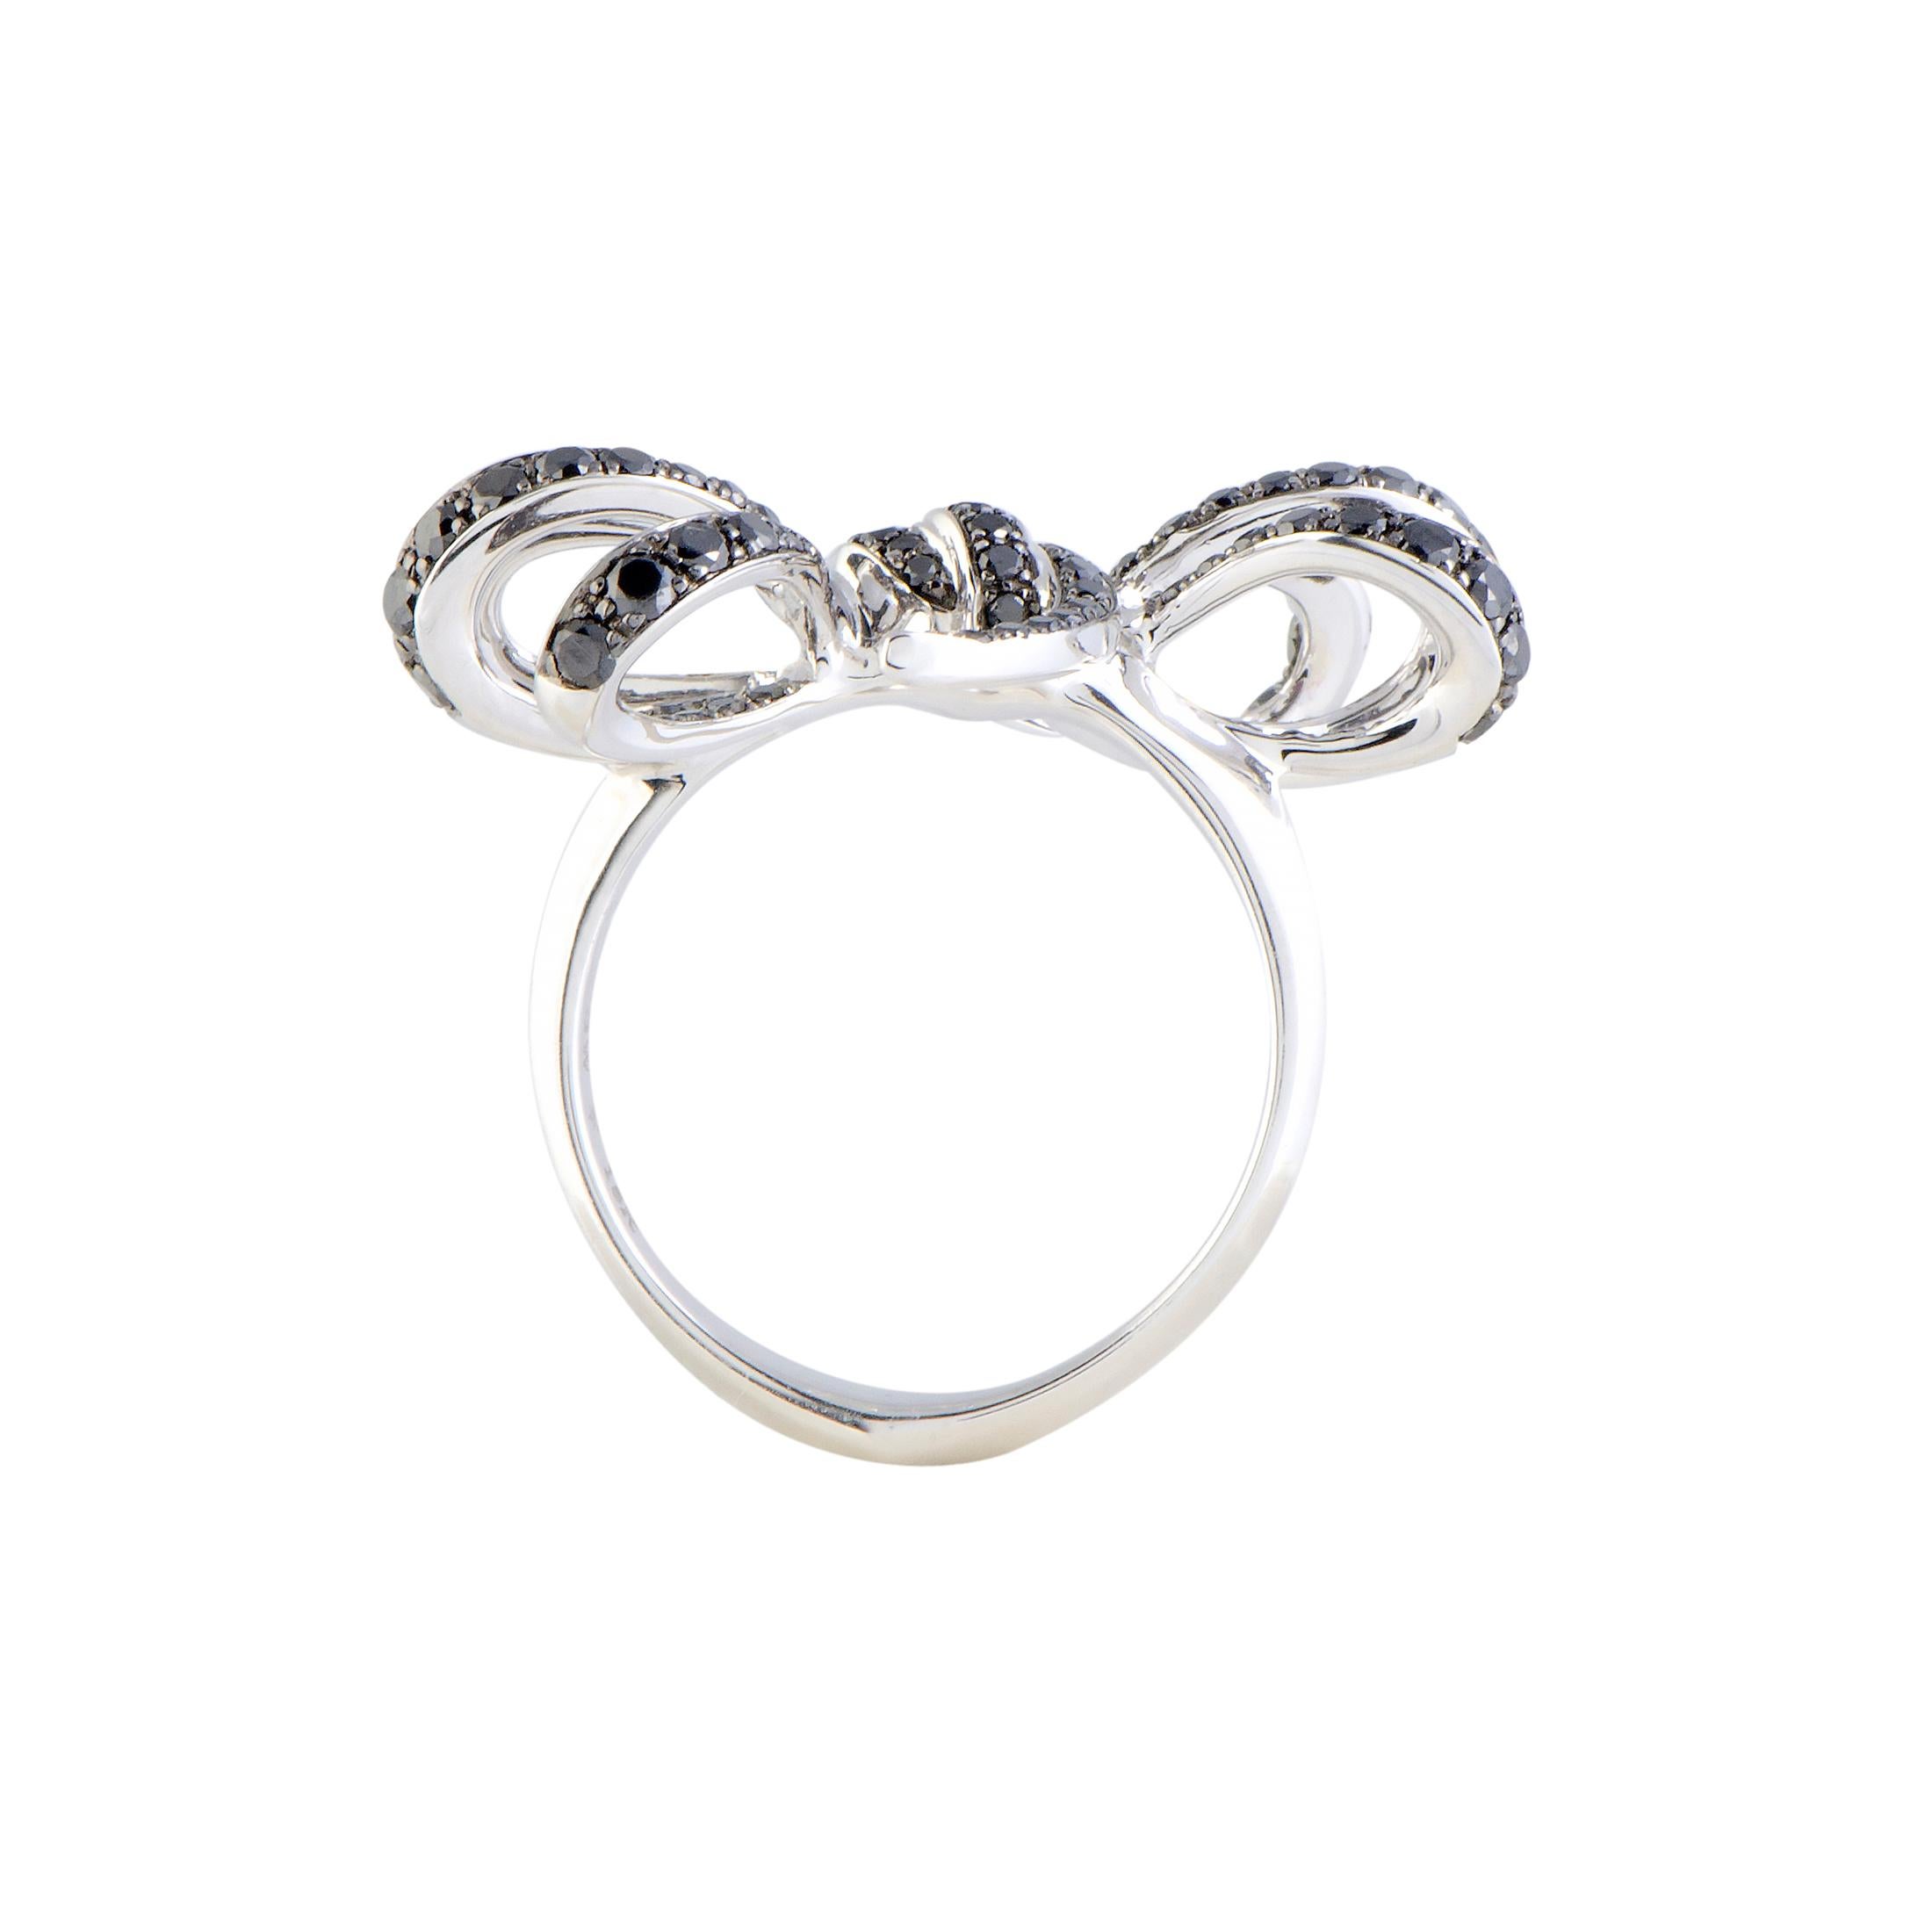 Eye-catching offbeat design and exquisitely fashionable appeal make this stunning ring from Stephen Webster a noteworthy addition to the spectacular “Forget Me Knot” collection. The ring is made of prestigious 18K white gold and set with captivating